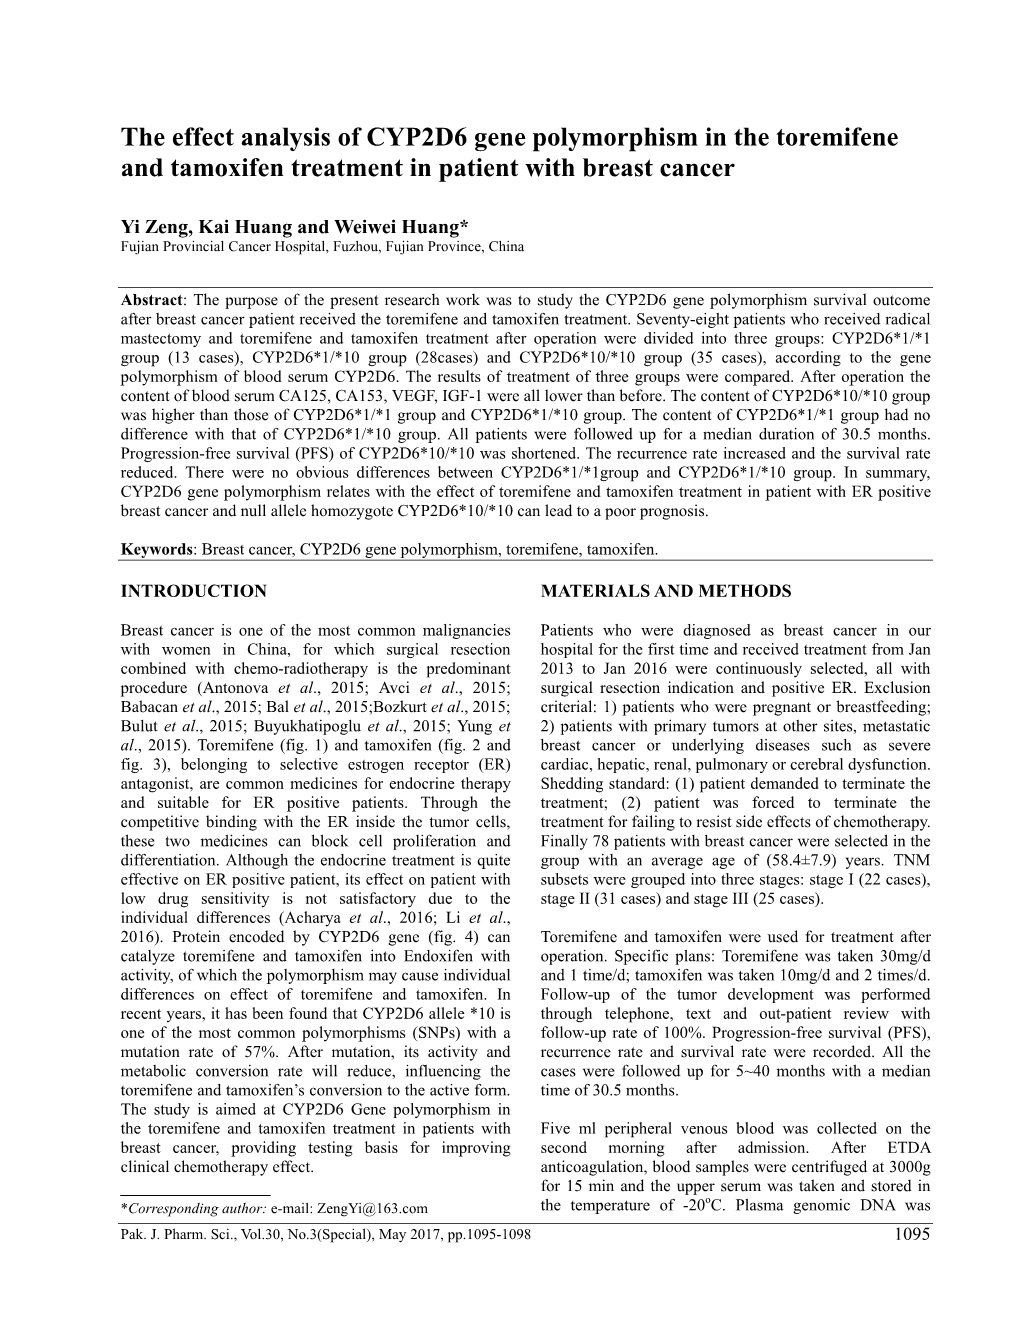 The Effect Analysis of CYP2D6 Gene Polymorphism in the Toremifene and Tamoxifen Treatment in Patient with Breast Cancer